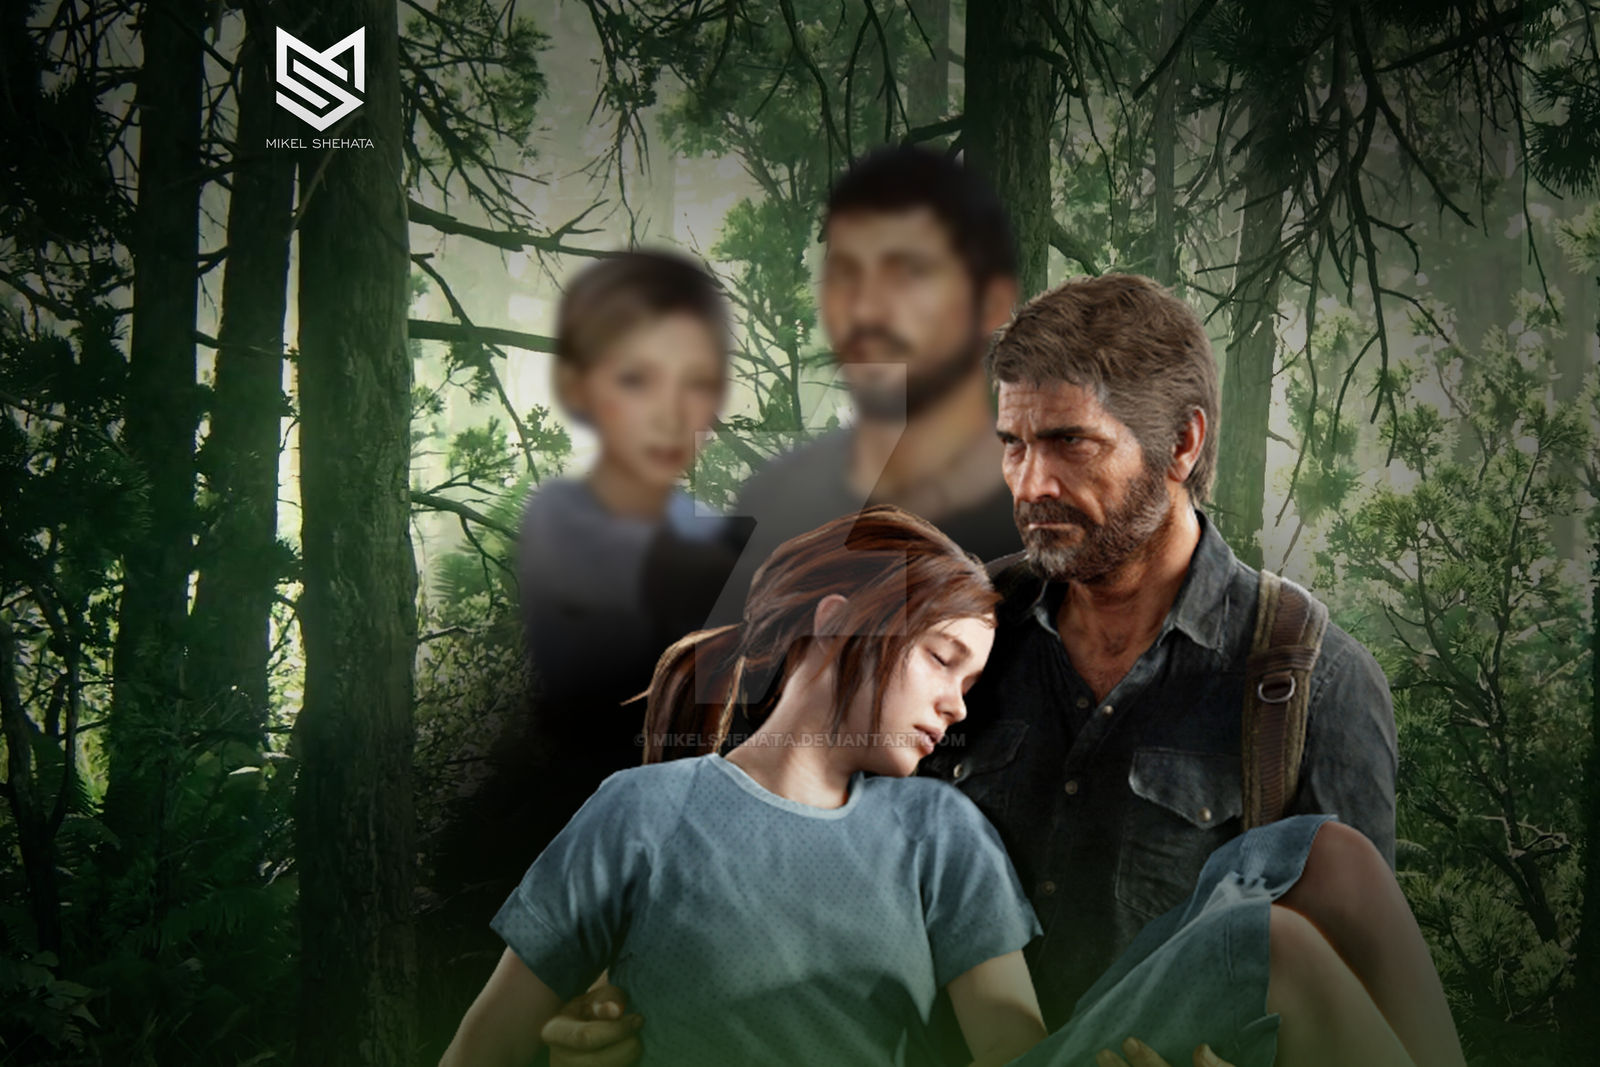 The Last of Us 2 - J.J, Ellie, and Abby by mikelshehata on DeviantArt